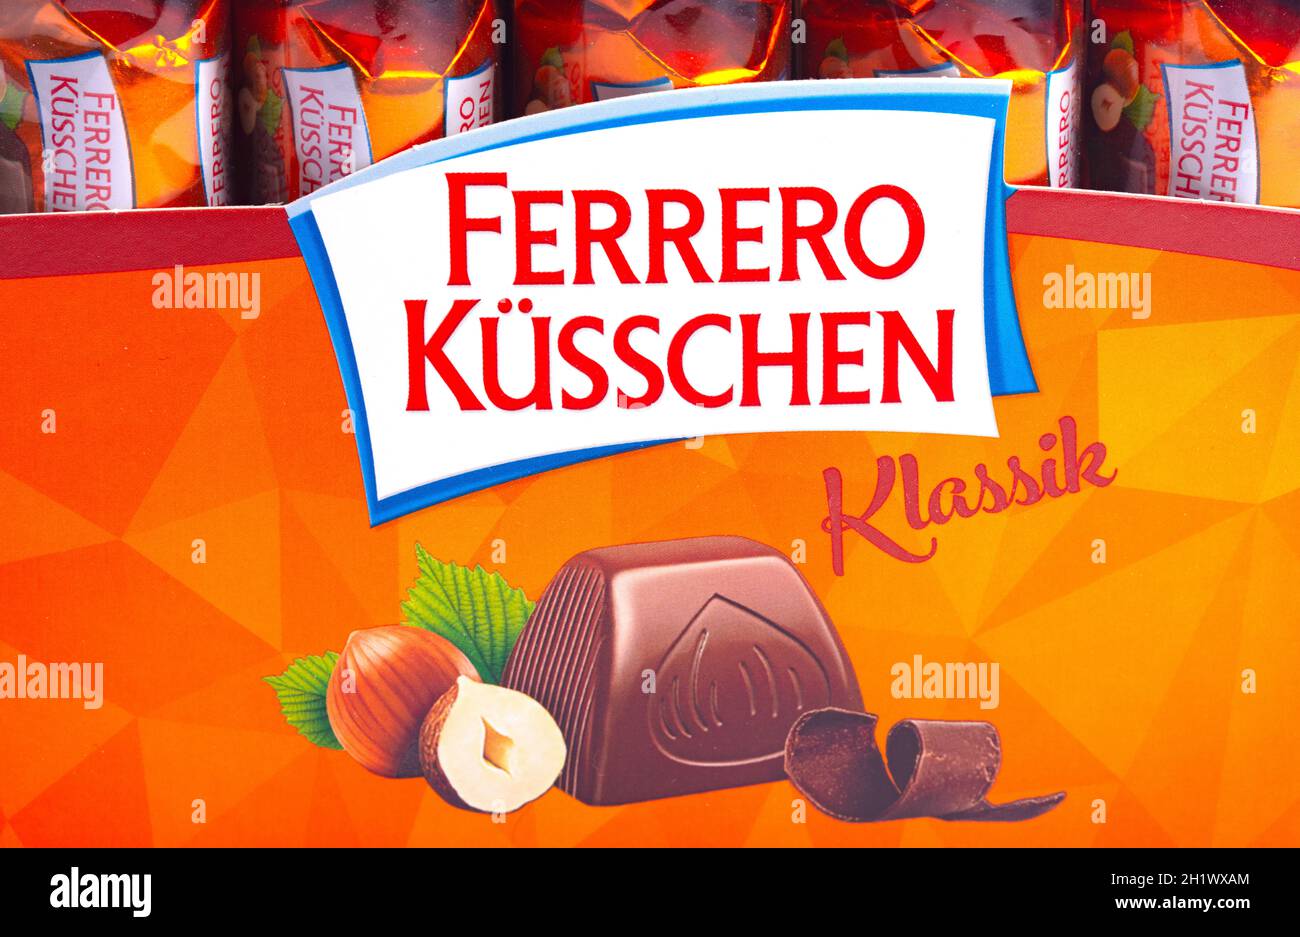 HUETTENBERG, GERMANY - 2021-07-24,   Box of Ferrero Kuesschen chocolates Logo in Detail. Ferrero is an Italian manufacturer of branded chocolate and c Stock Photo